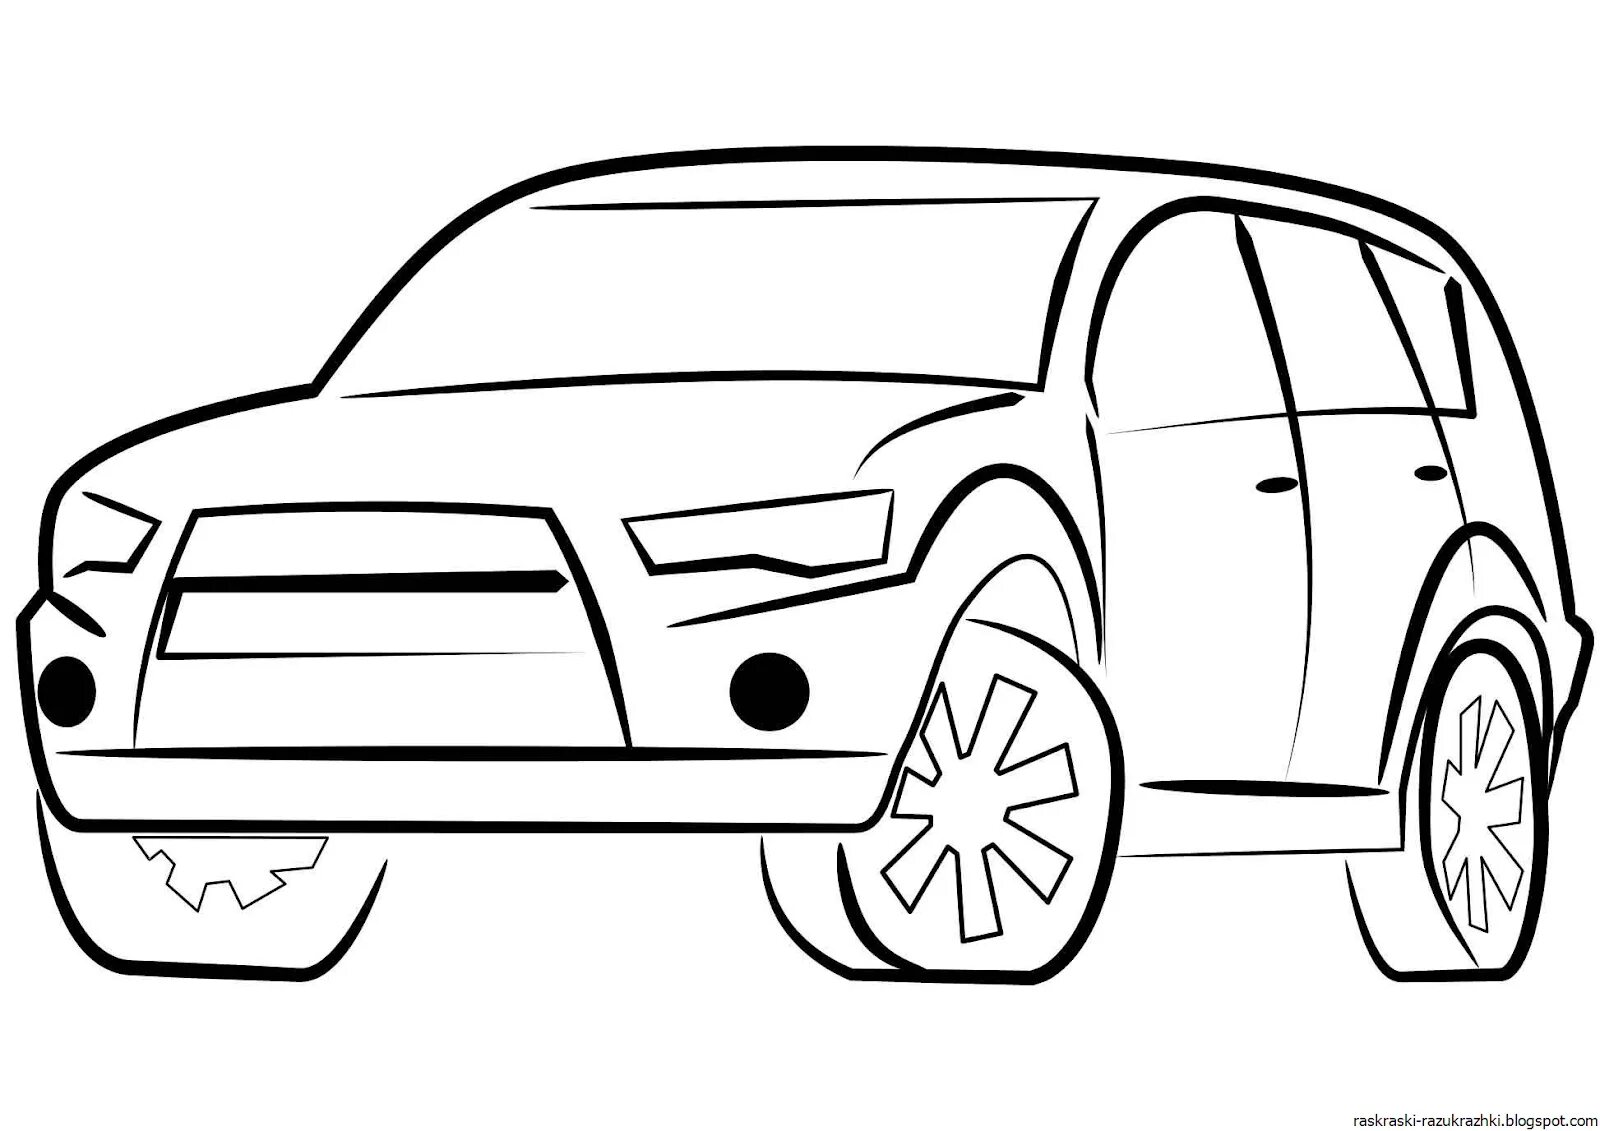 Cute passenger car coloring pages for kids